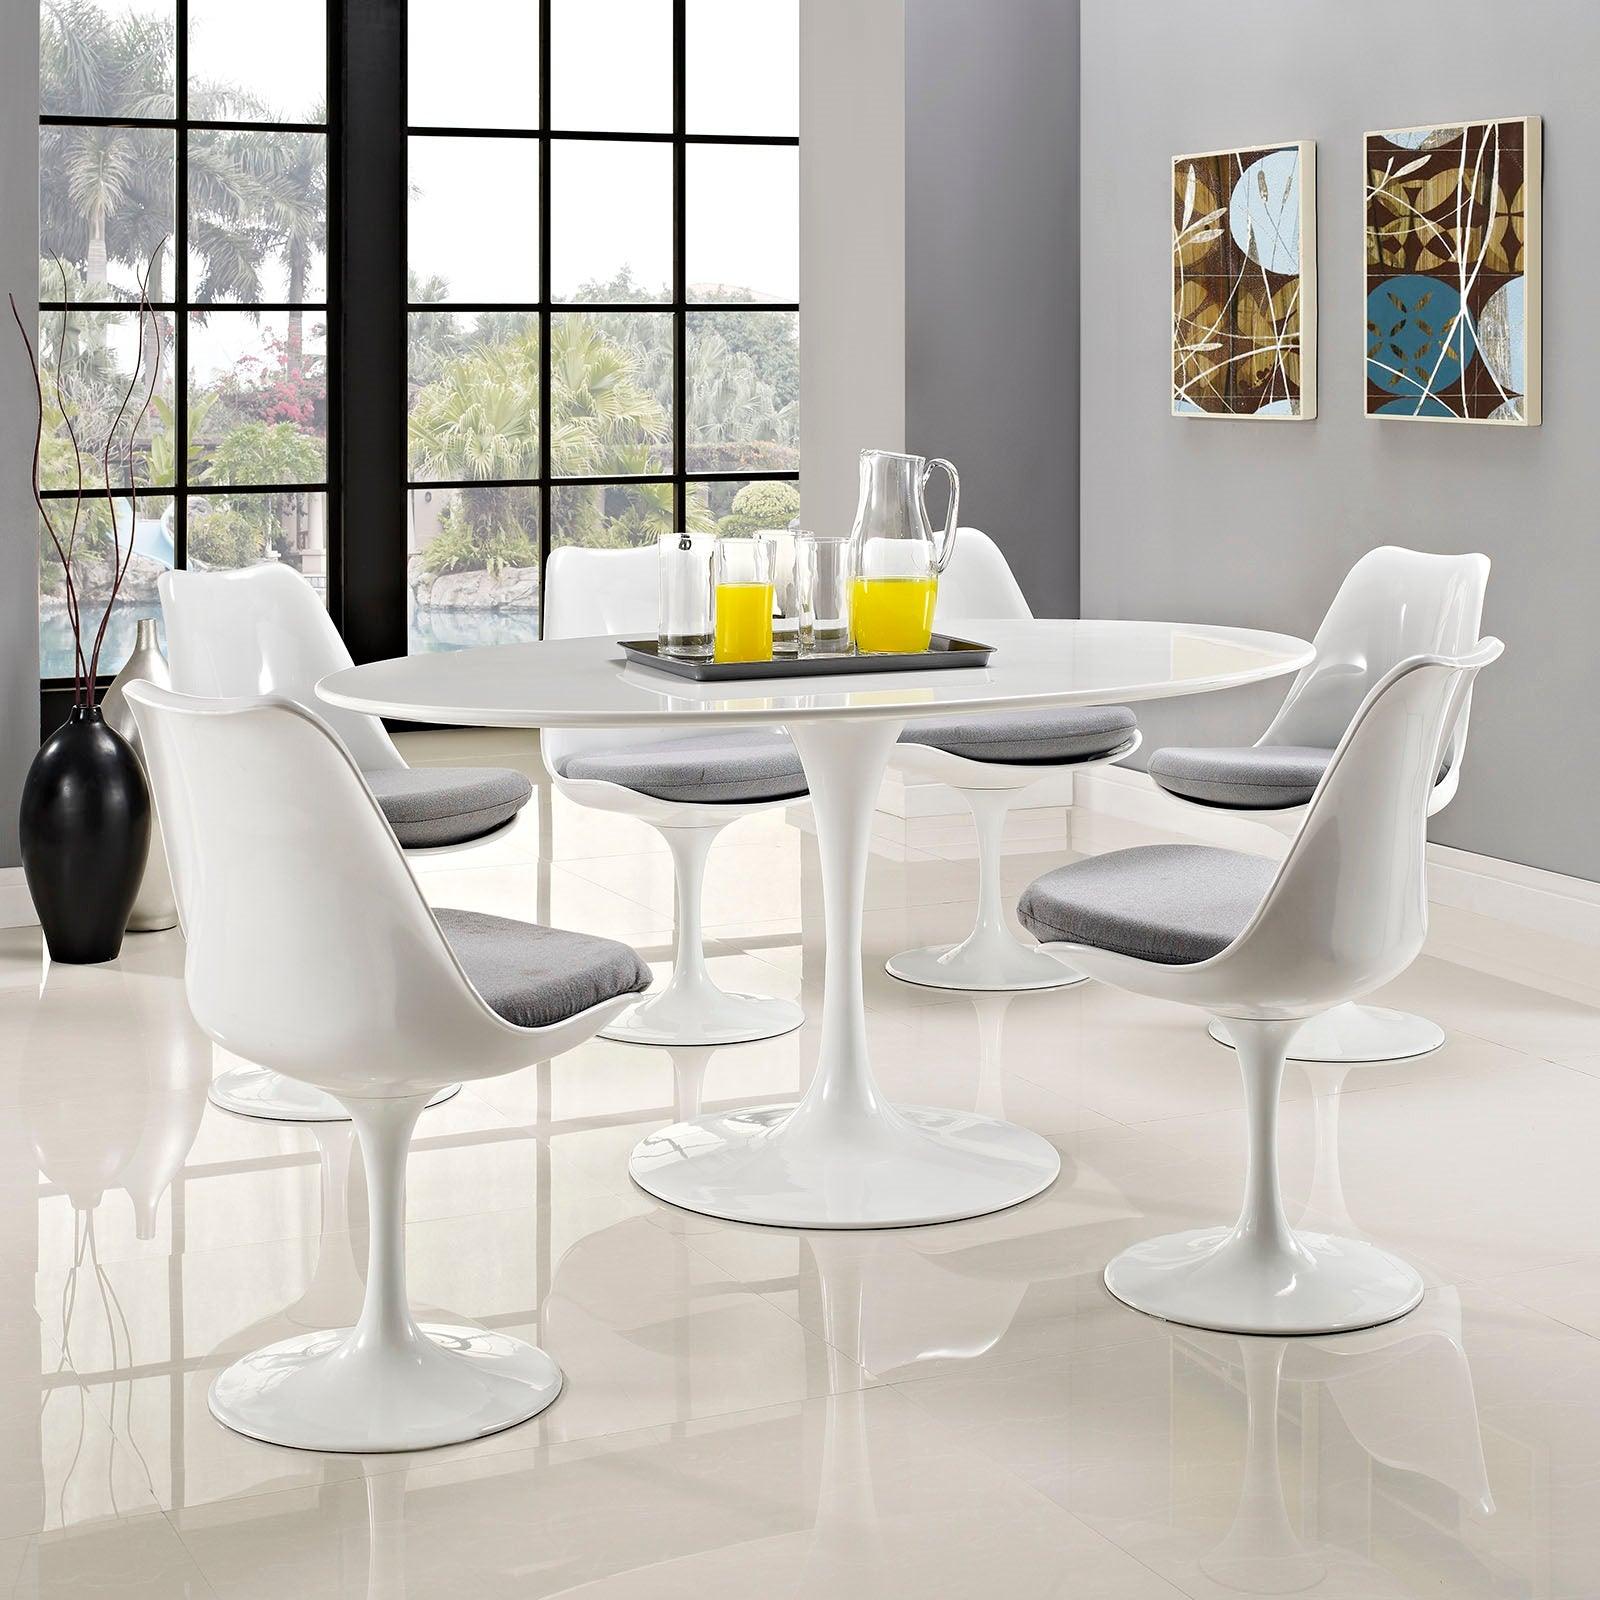 Lola 60" Oval Wood Top Dining Table in White - Euro Living Furniture